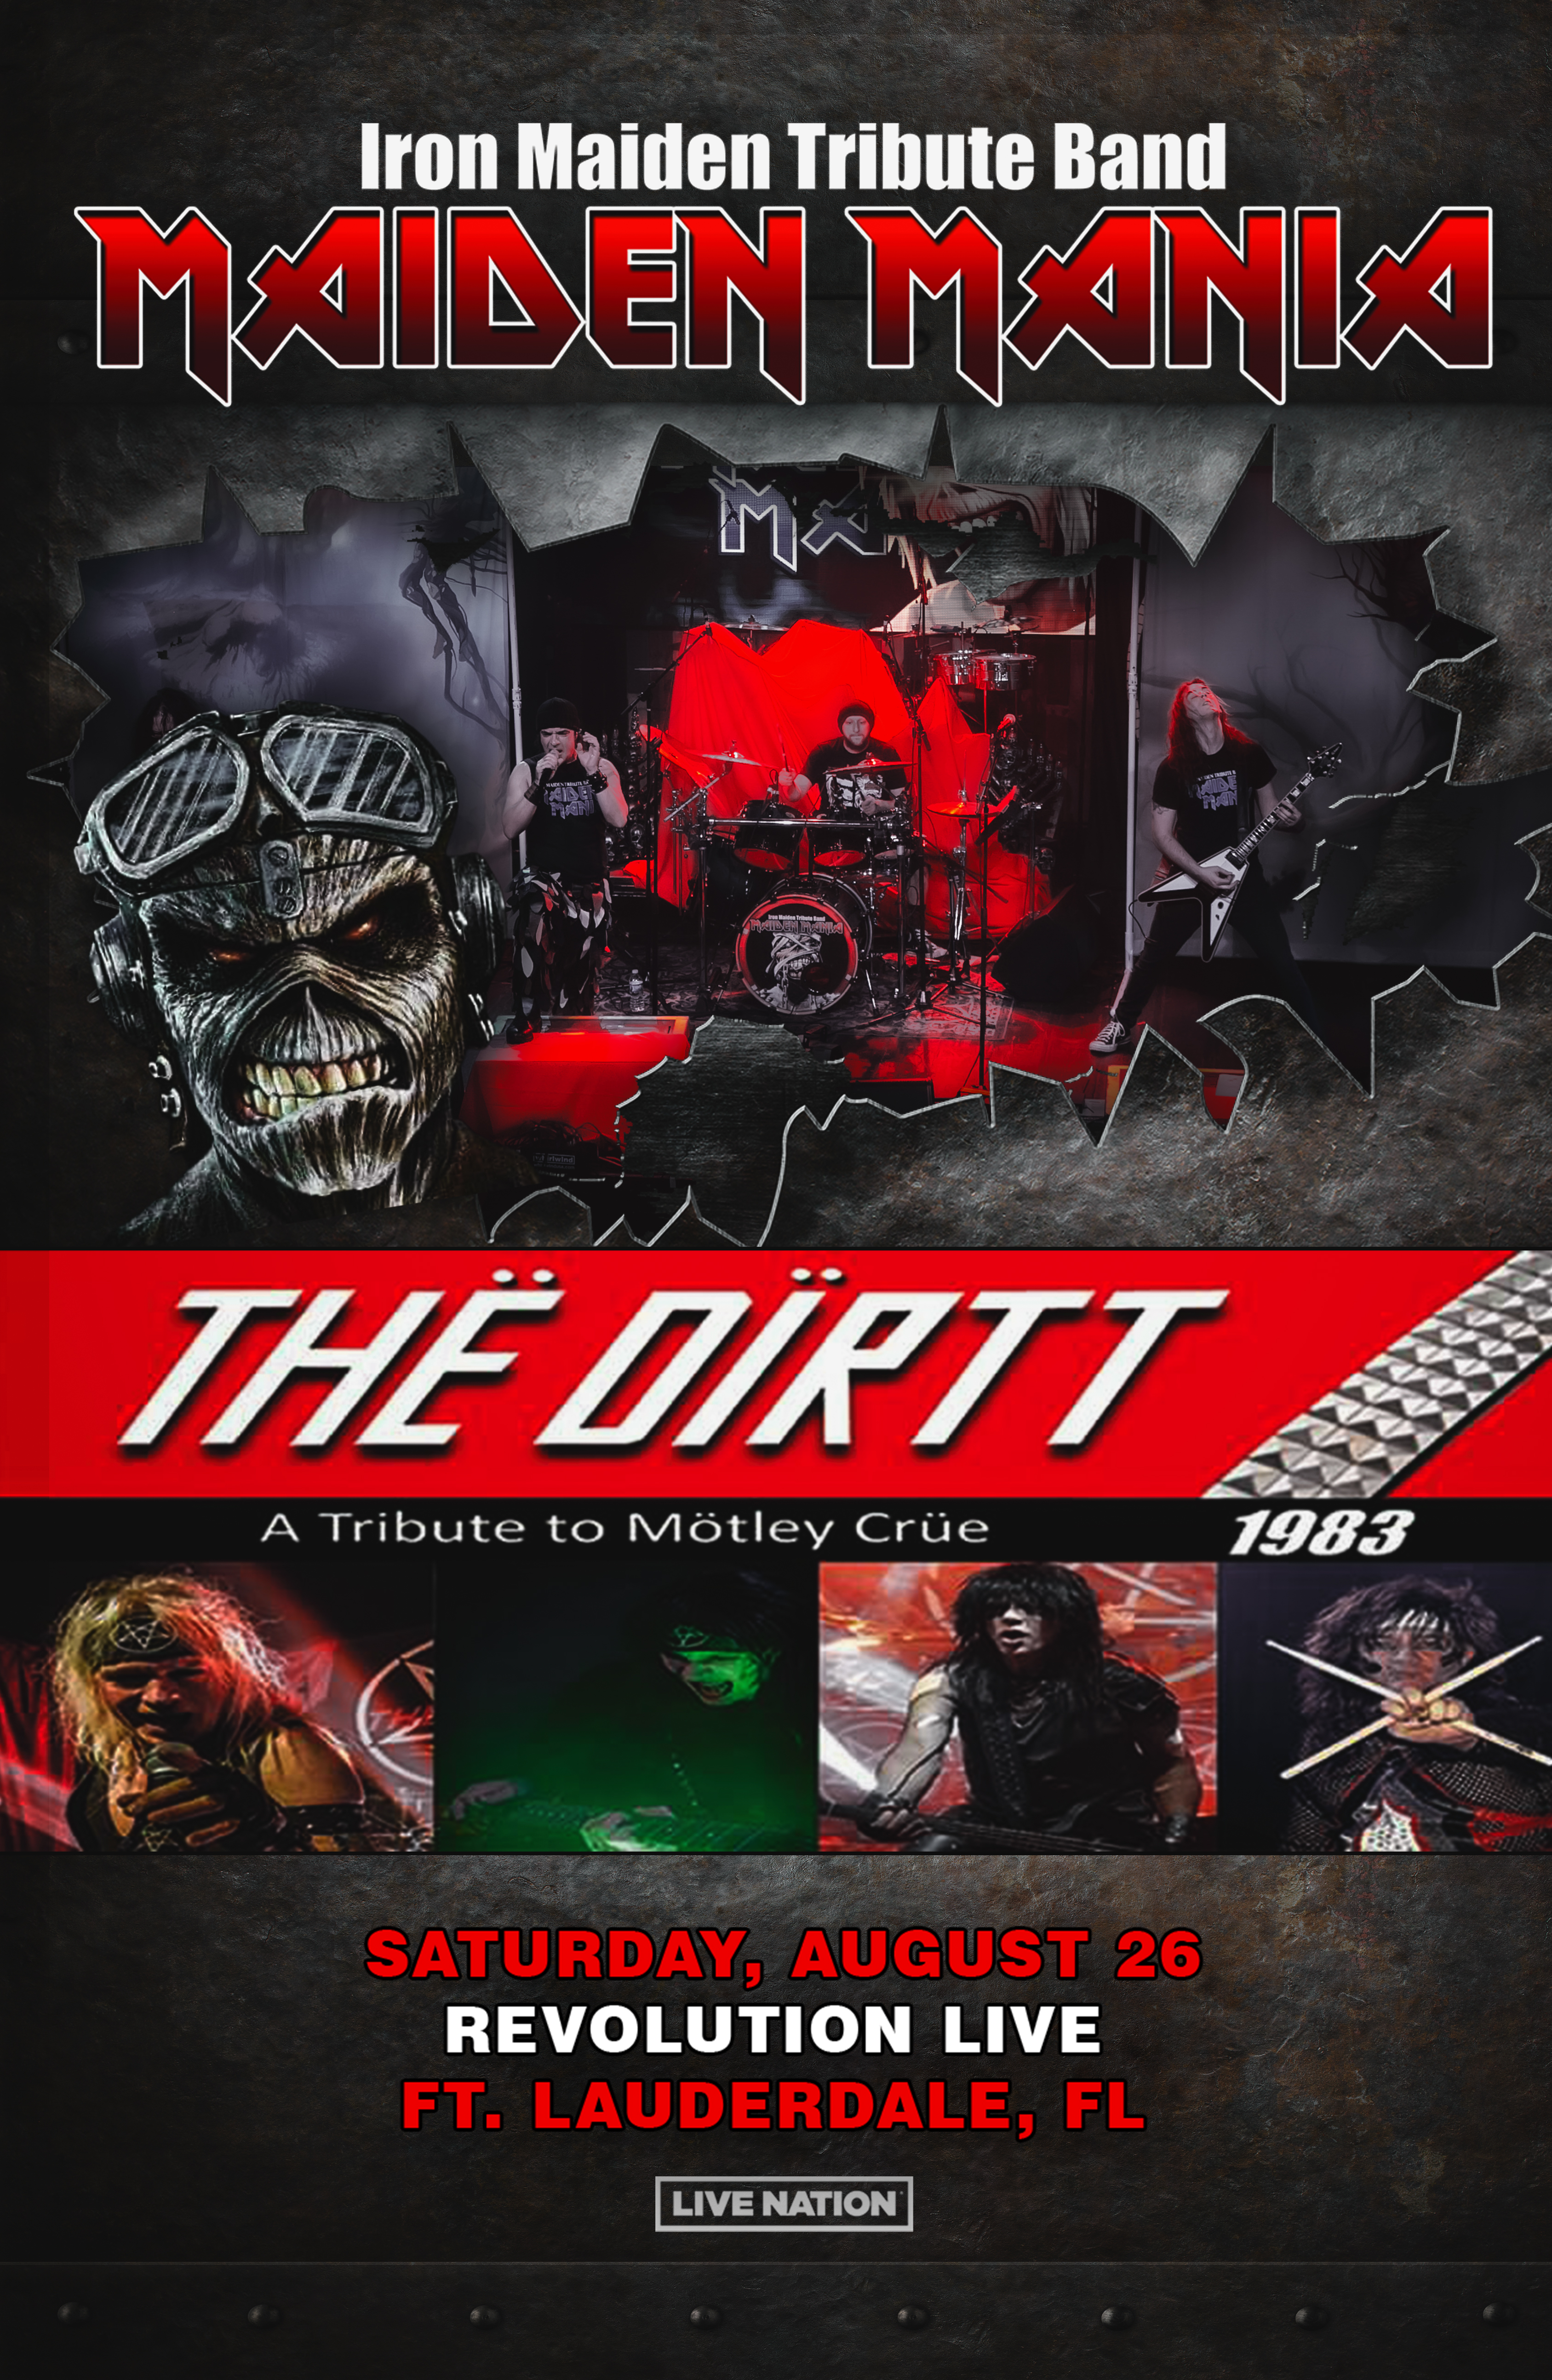 Maiden Mania - Iron Maiden Tribute and The DIRTT - A Tribute to Motley Crue